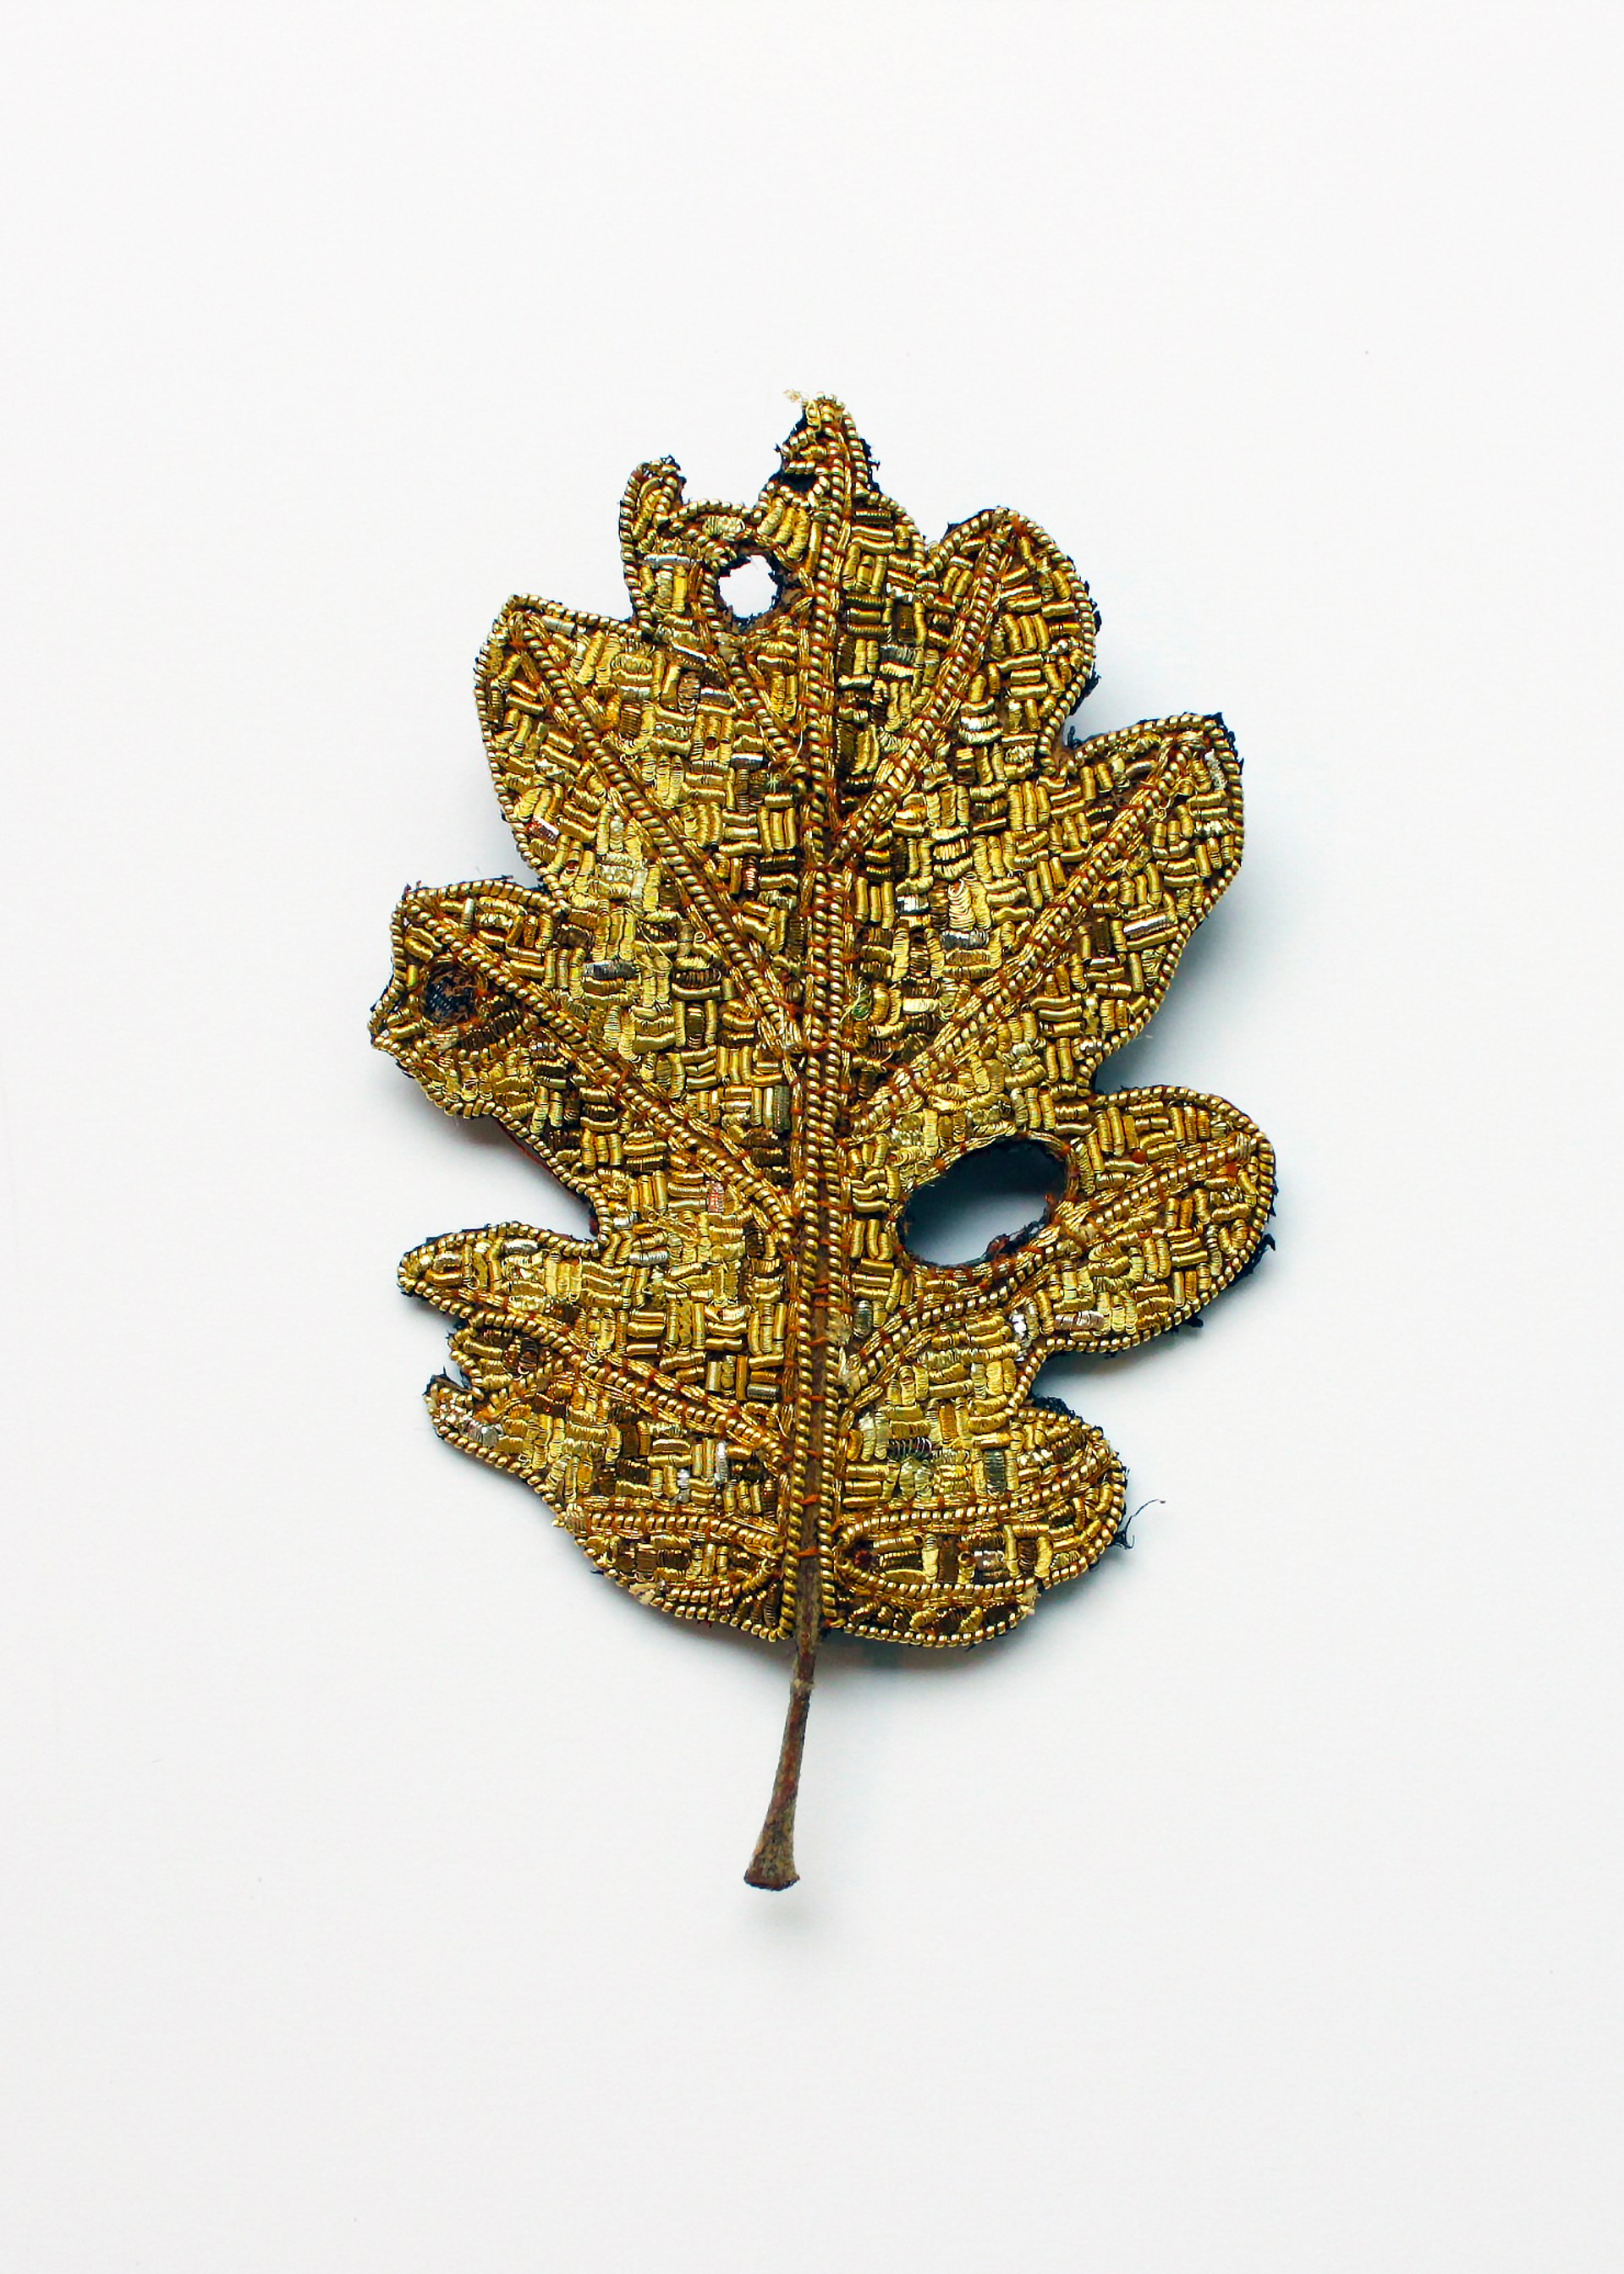 The Impermanence of Life: Oak Leaf from South Carolina by Tiao Nithakhong Somsanith